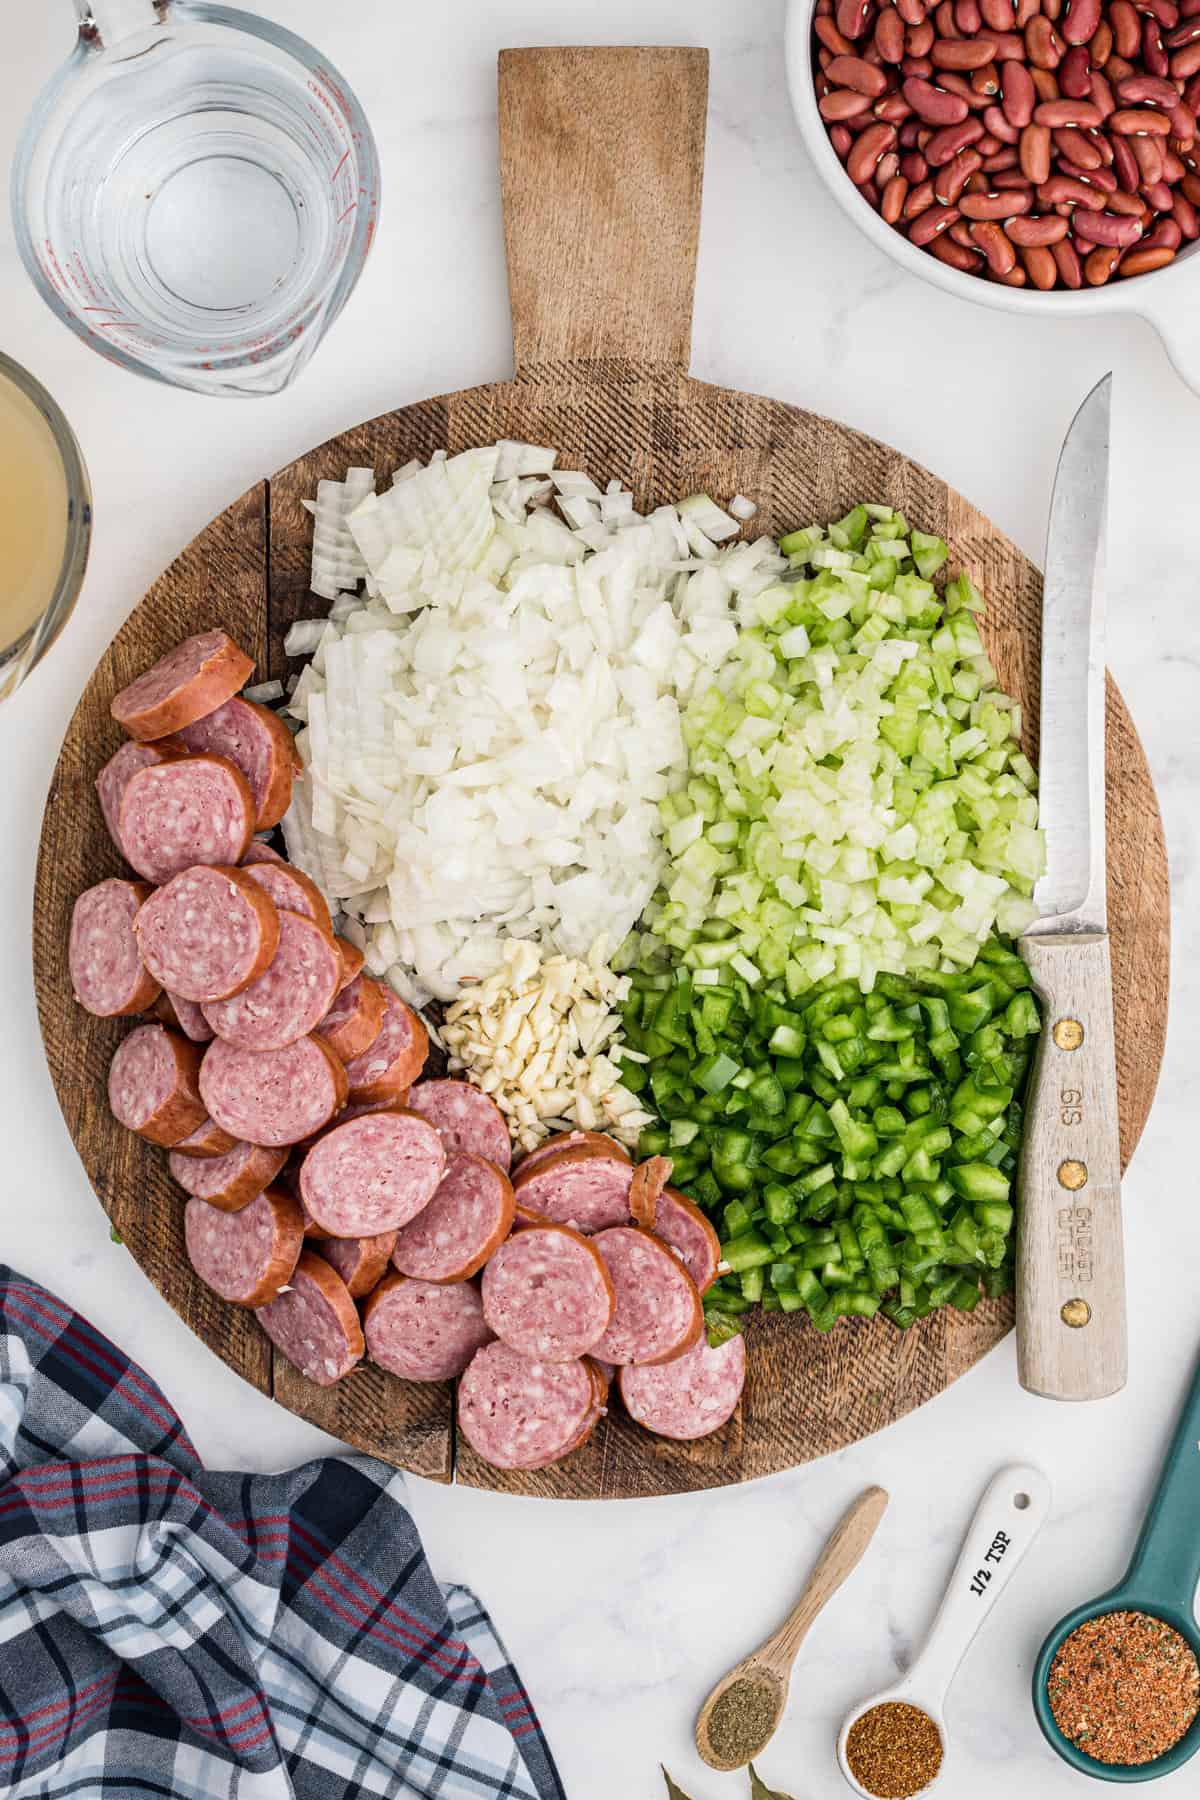 A round wooden cutting board is presented with raw sausage slices and uncooked chopped veggies.